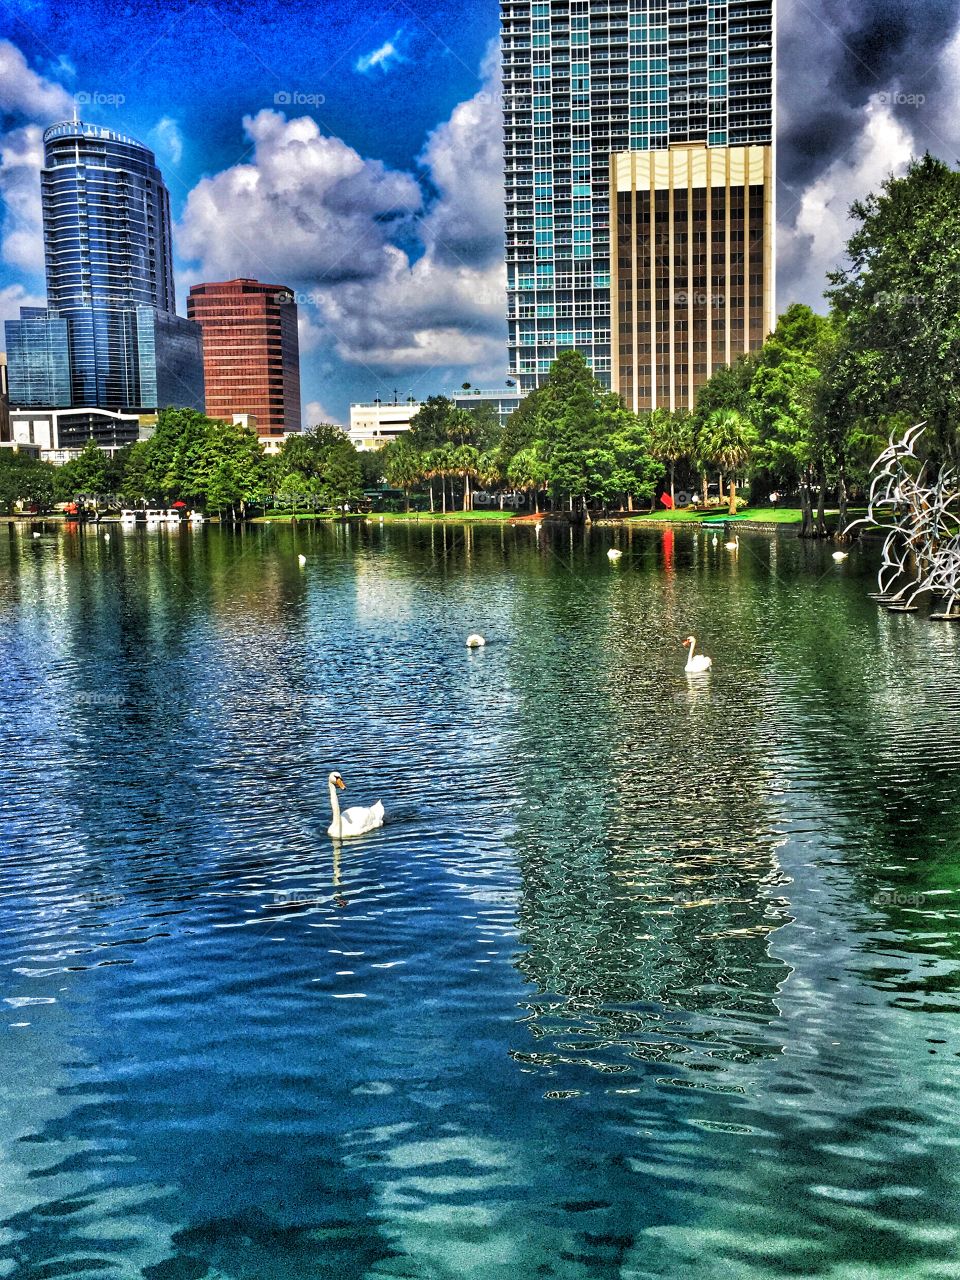 Swan Lake. A lake with a city in the background 